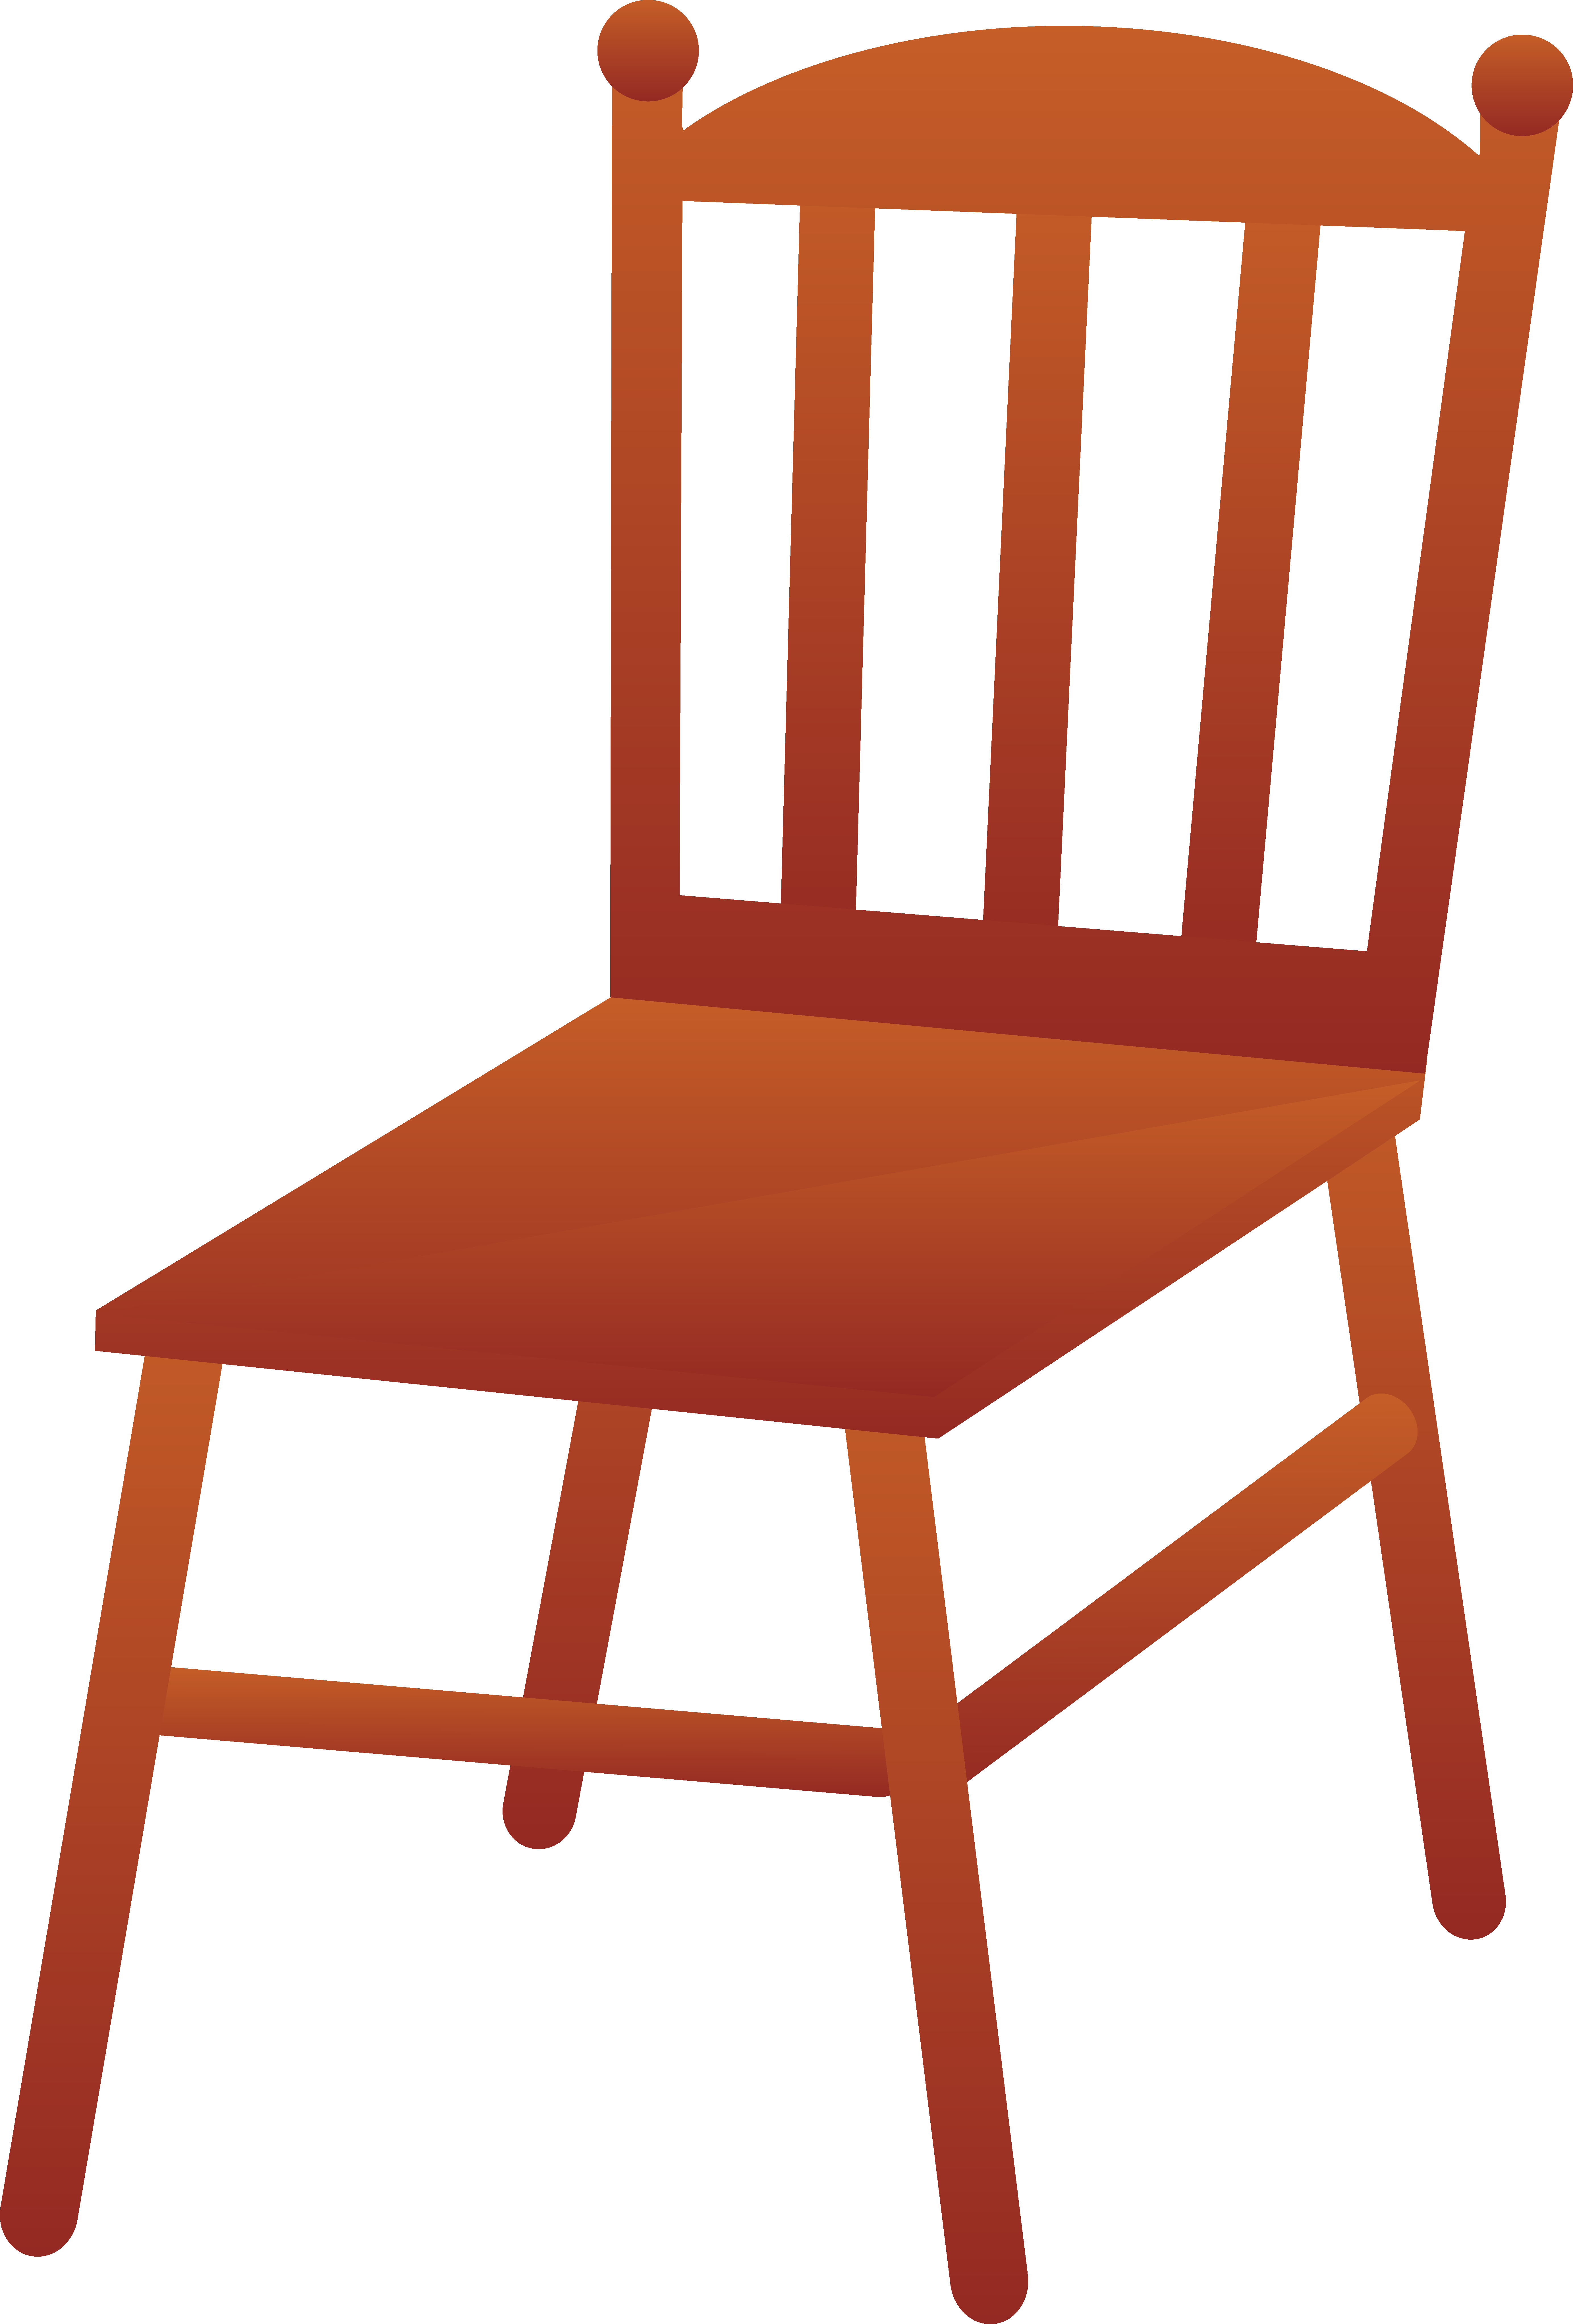 Free Chair Cartoon Cliparts, Download Free Chair Cartoon Cliparts png